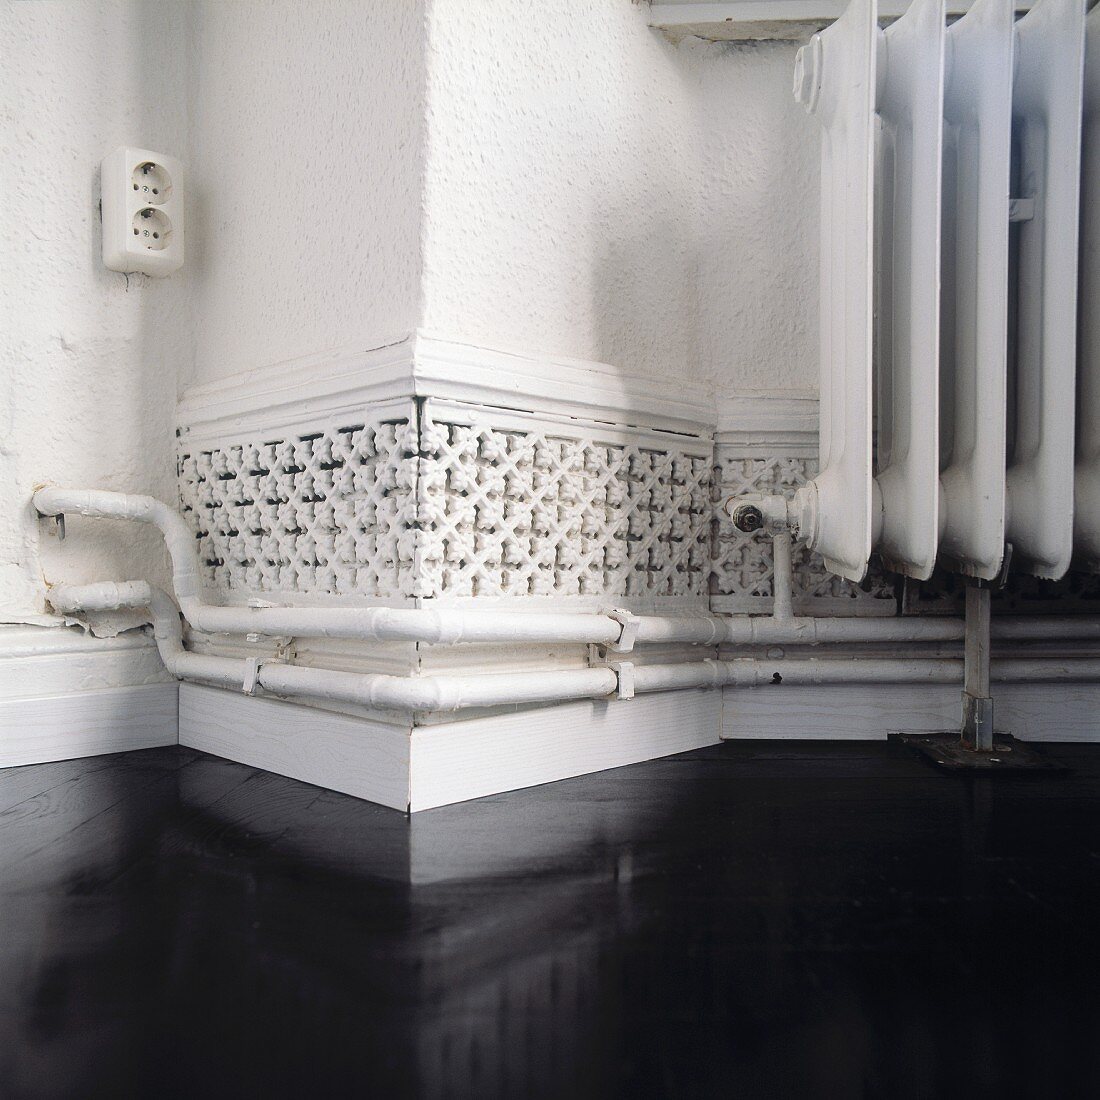 Detail of corner with radiator and ventilation duct with ornamental cover